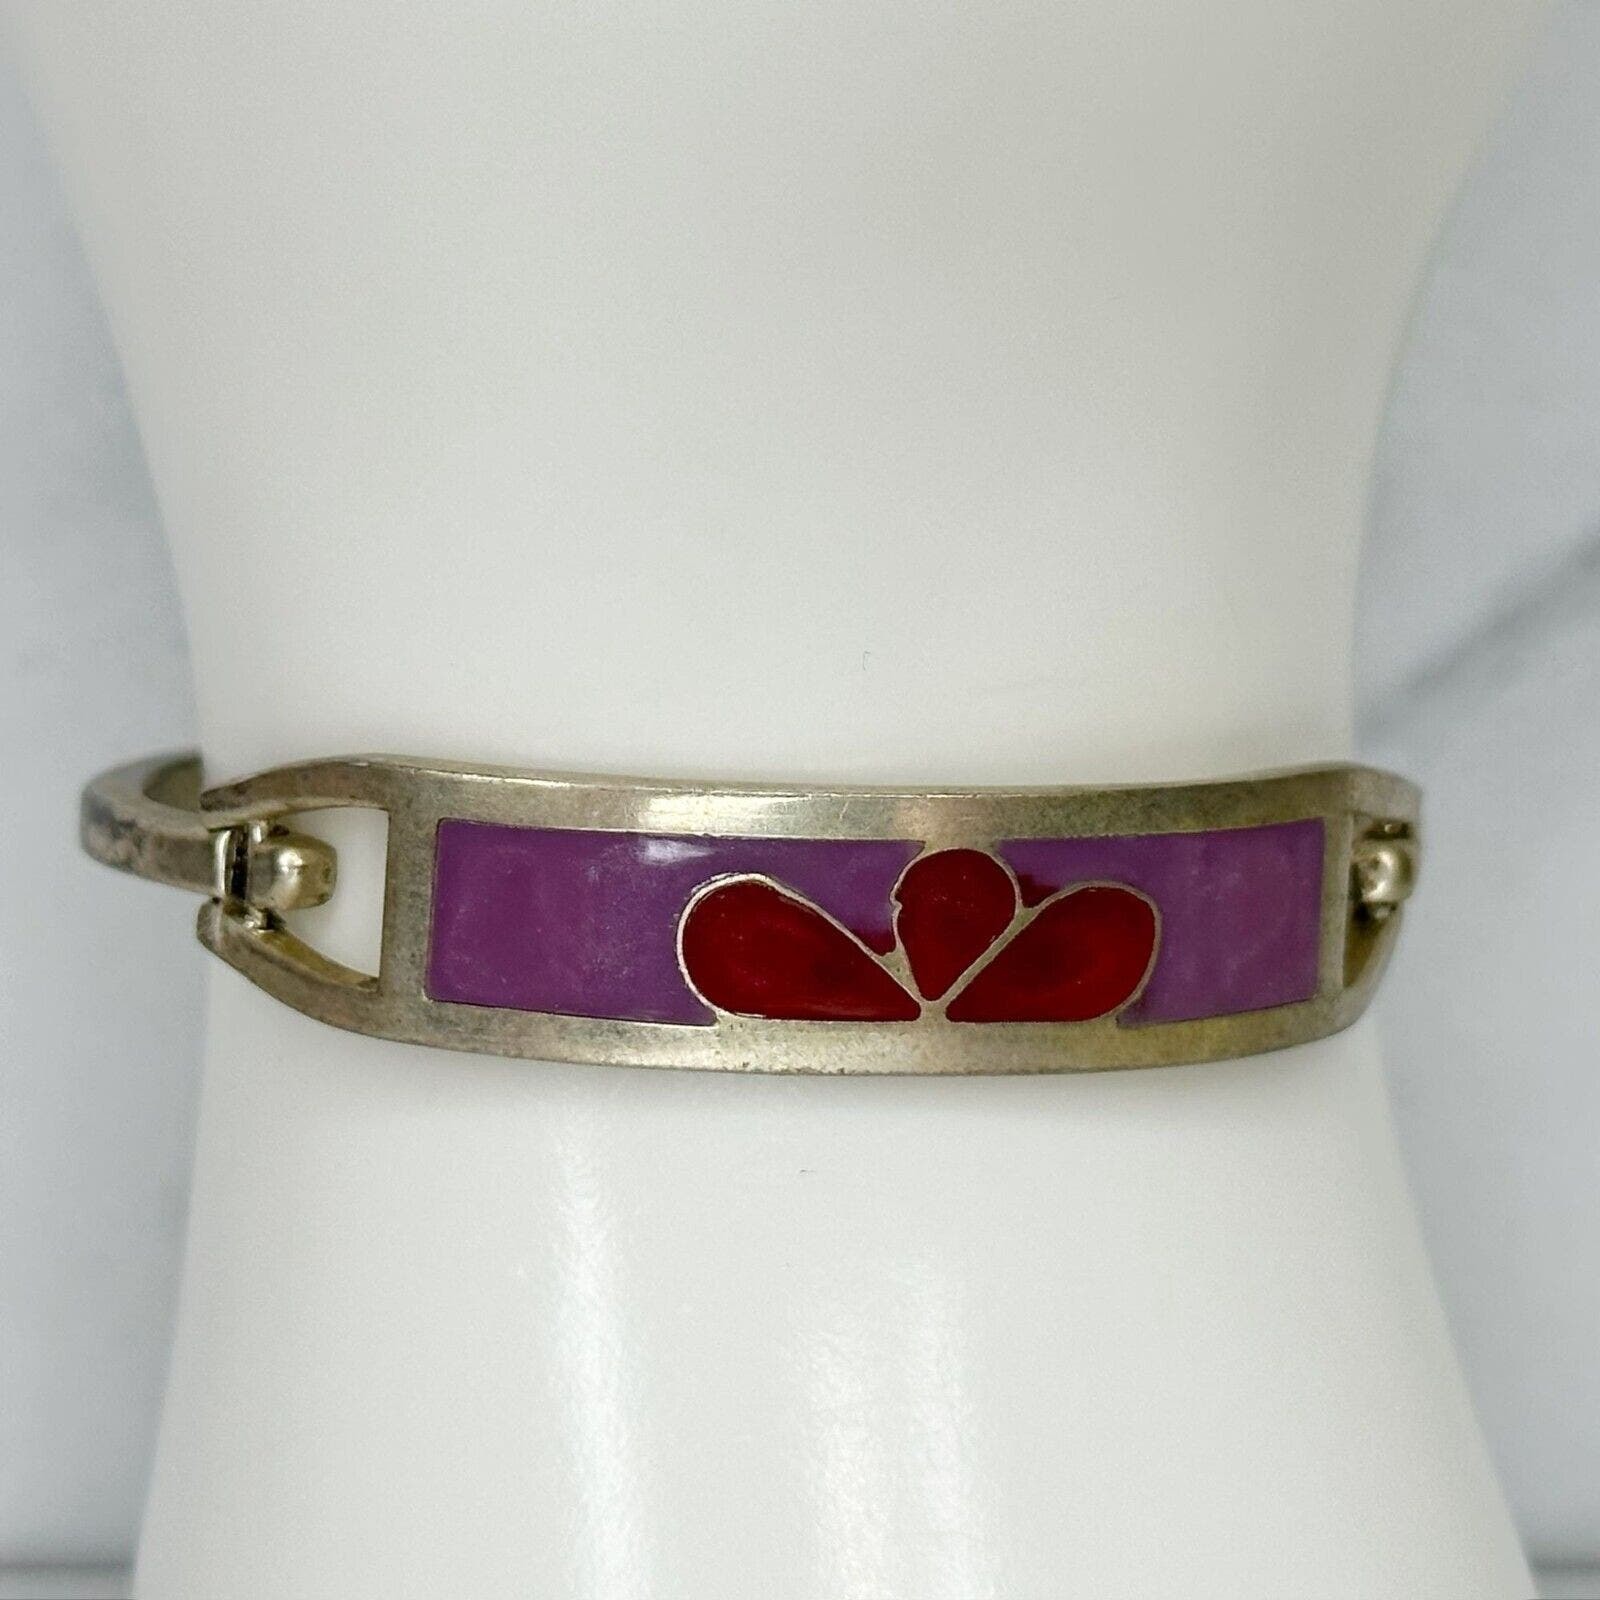 Primary image for Vintage Mexico Taxco Silver Tone Red and Pink Flower Bangle Child's Bracelet